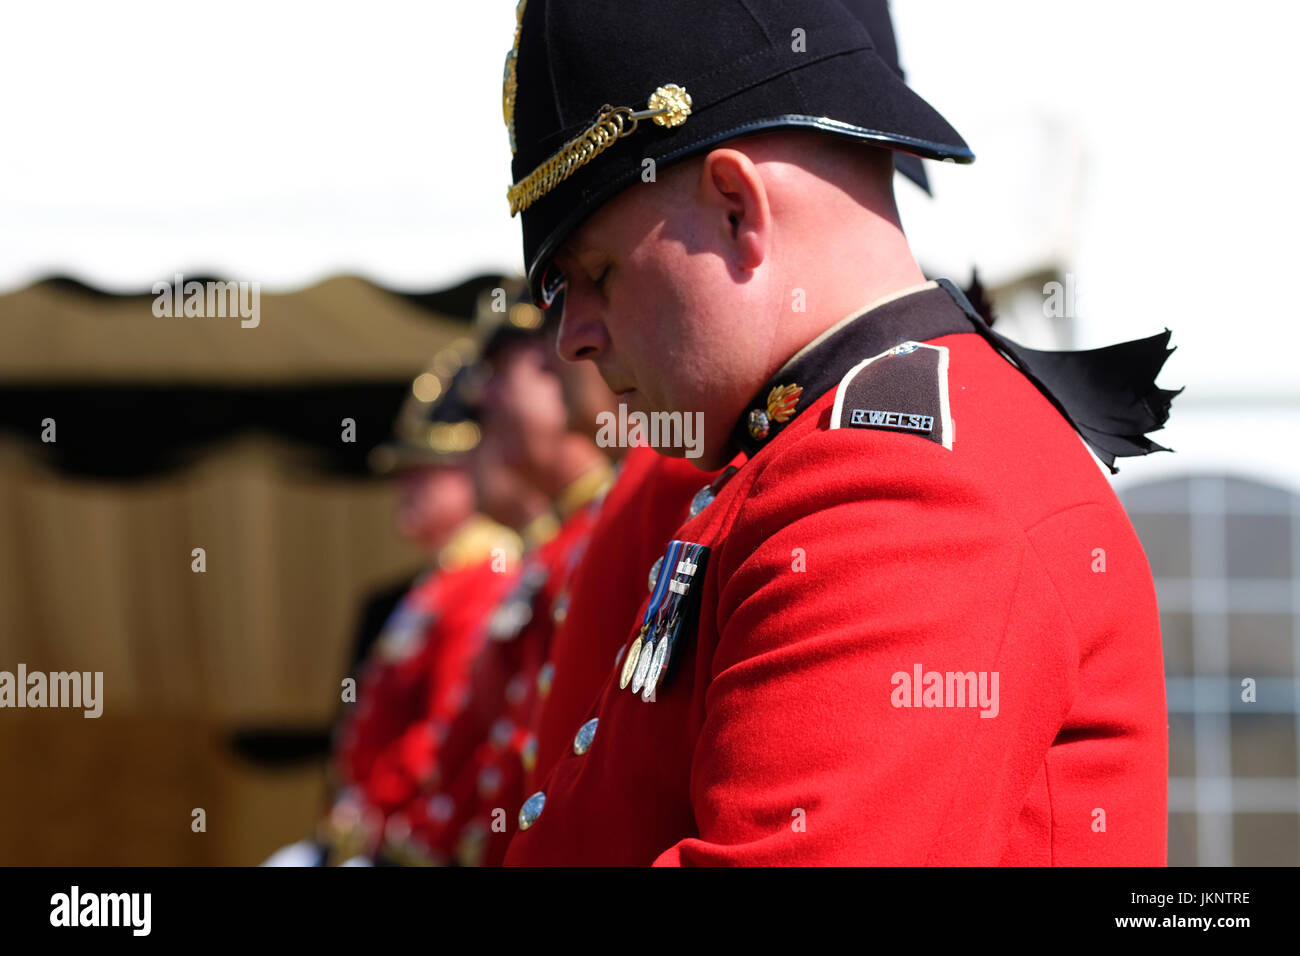 Builth Wells, Wales, UK. 24th July, 2017. Royal Welsh Show: Members of the band of the Royal Welsh regiment at the opening day of the largest four day agricultural show in Wales. Photo Steven May / Alamy Live News Stock Photo